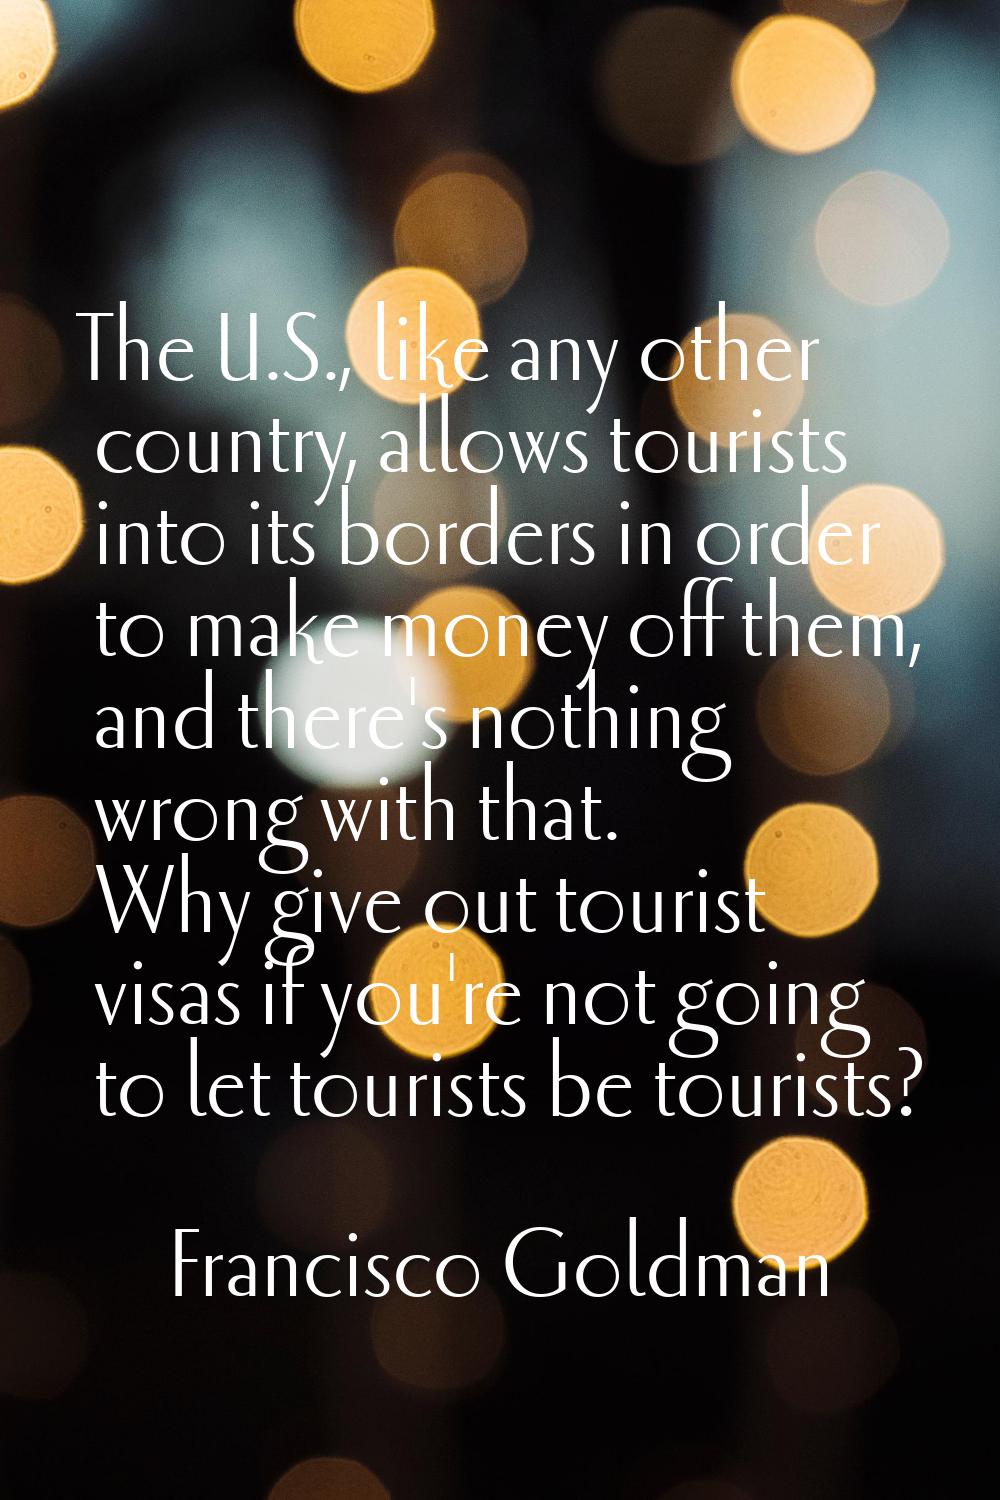 The U.S., like any other country, allows tourists into its borders in order to make money off them,